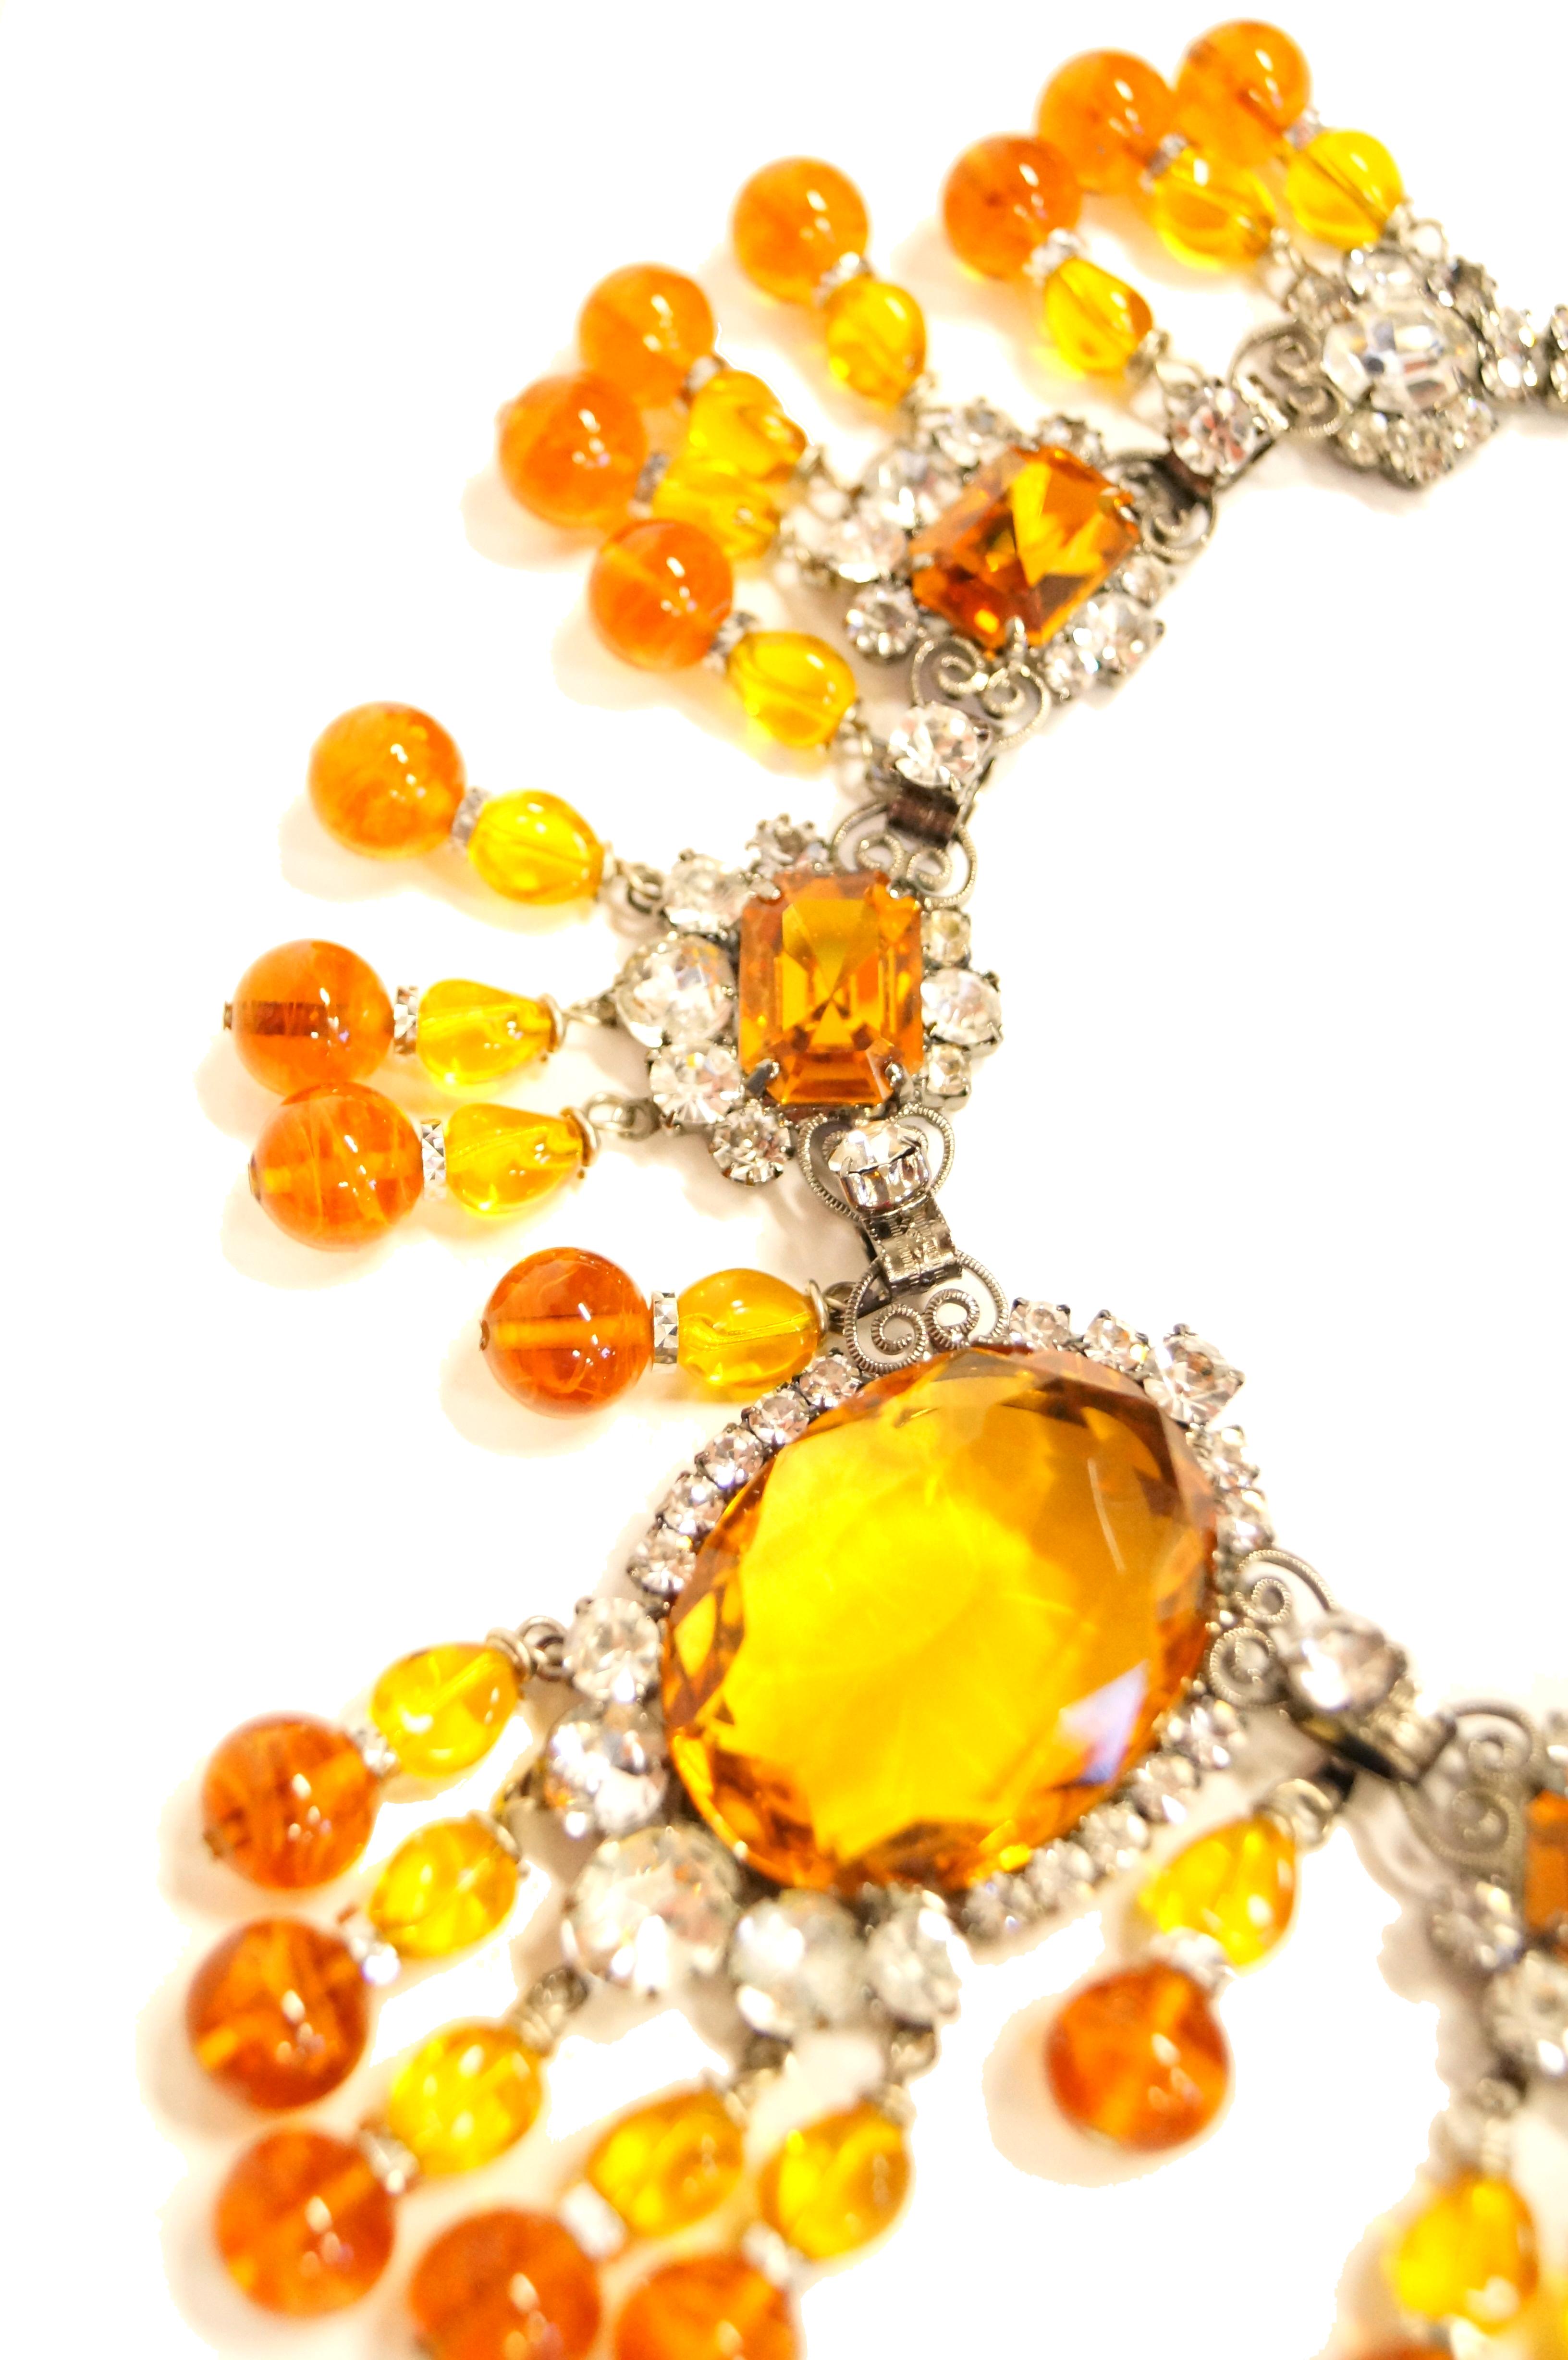 Oval Cut Lawrence Vrba Citrine Glass Statement Necklace and Earrings Set